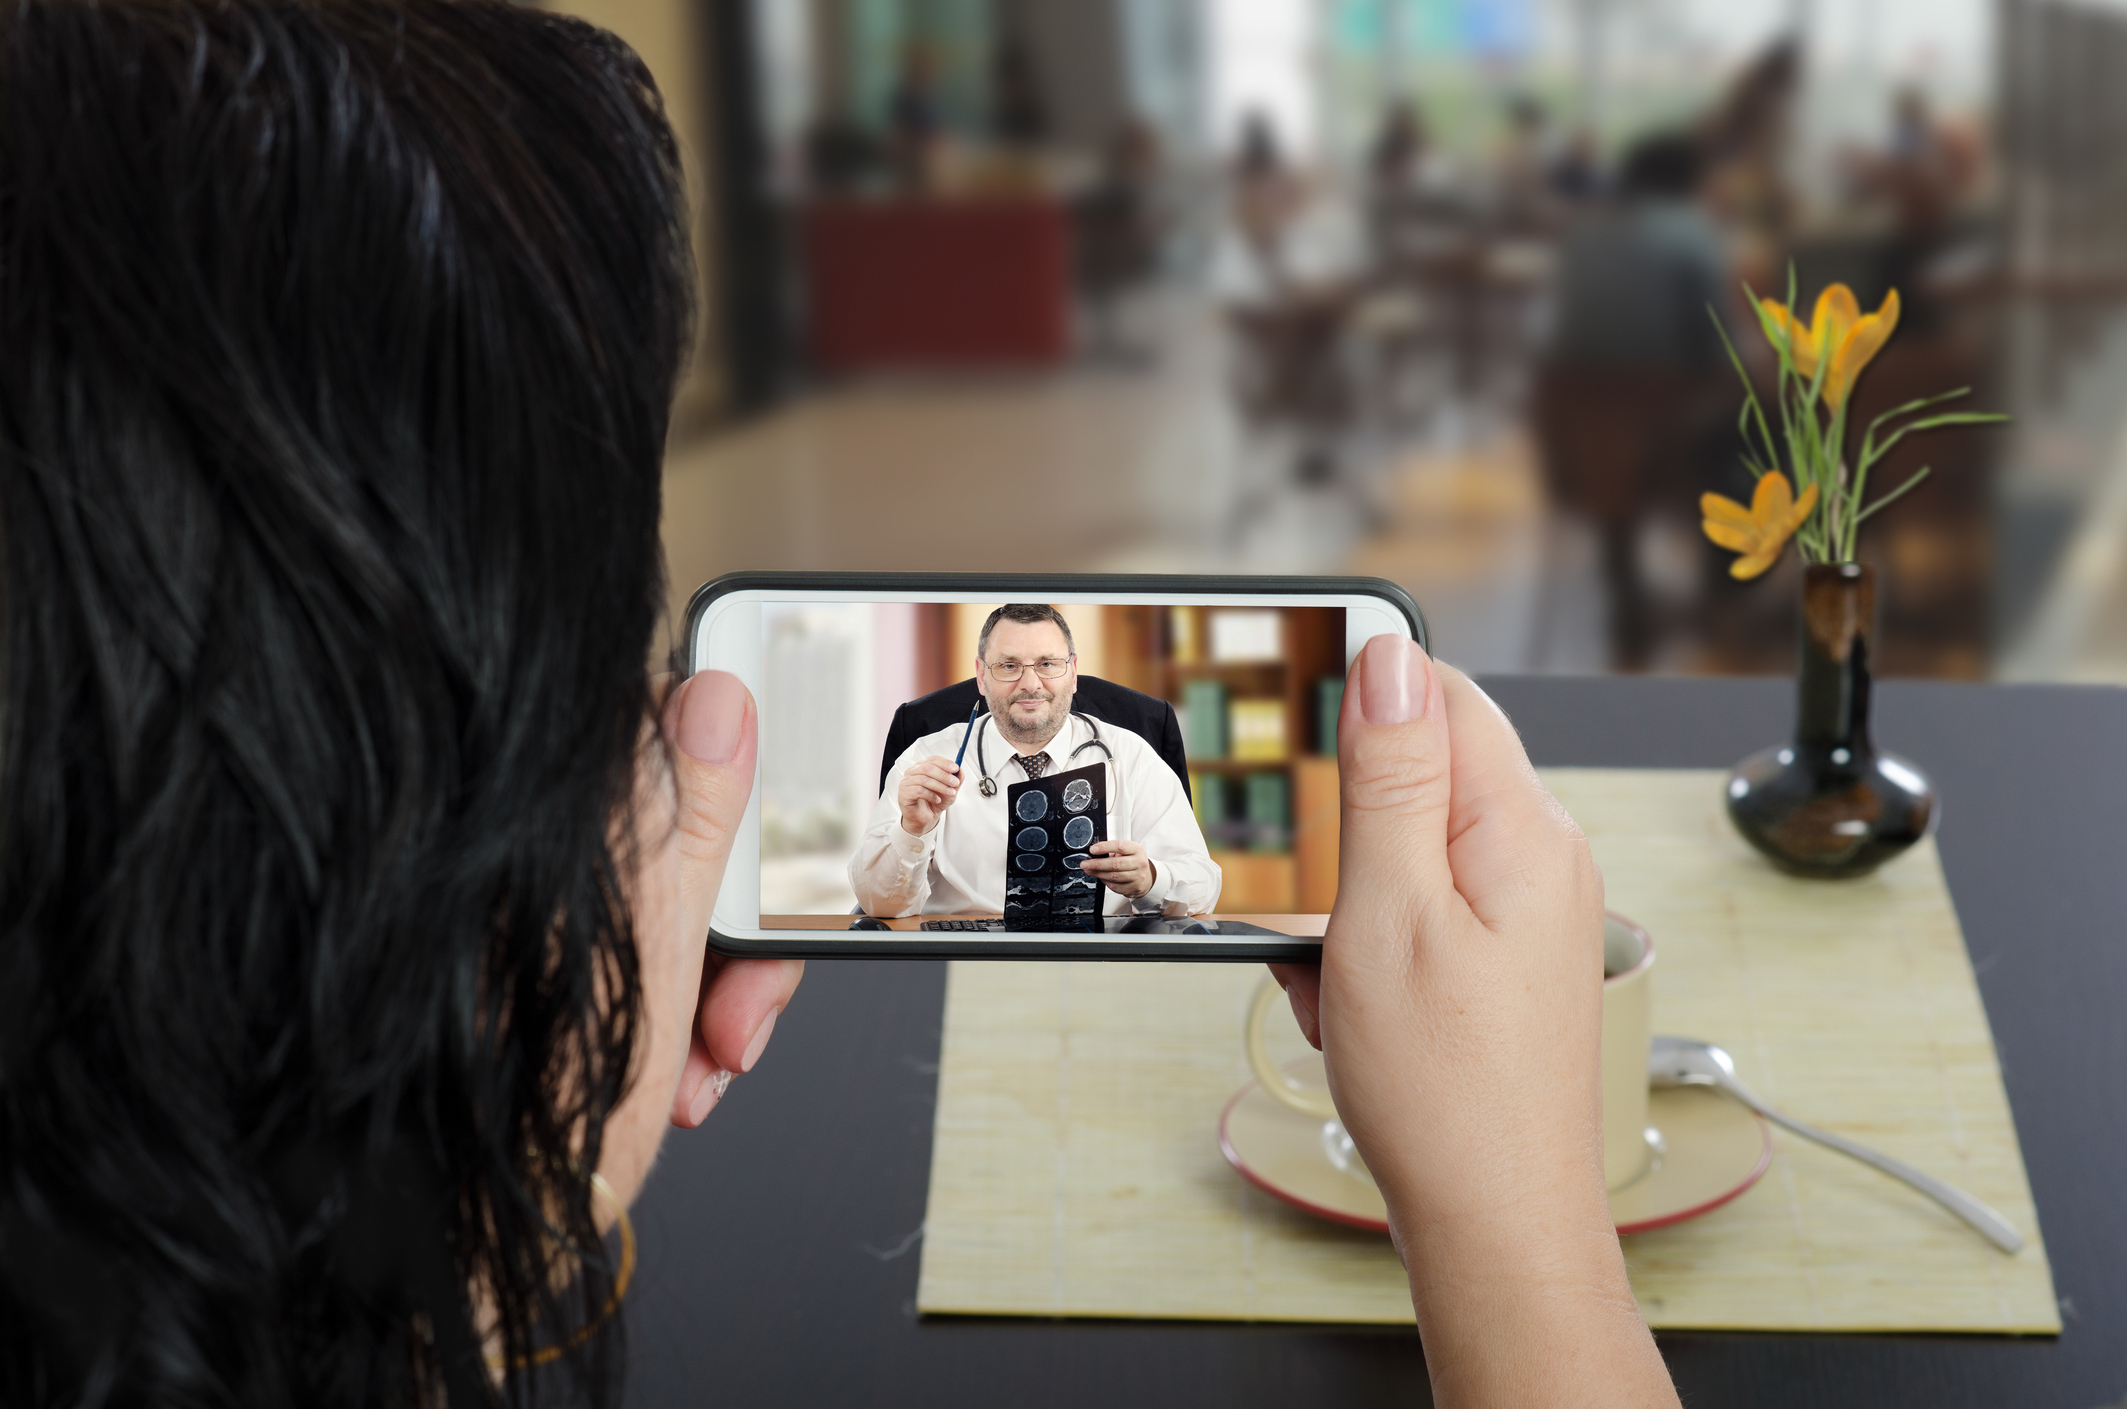 Are Patients Satisfied with Telehealth?